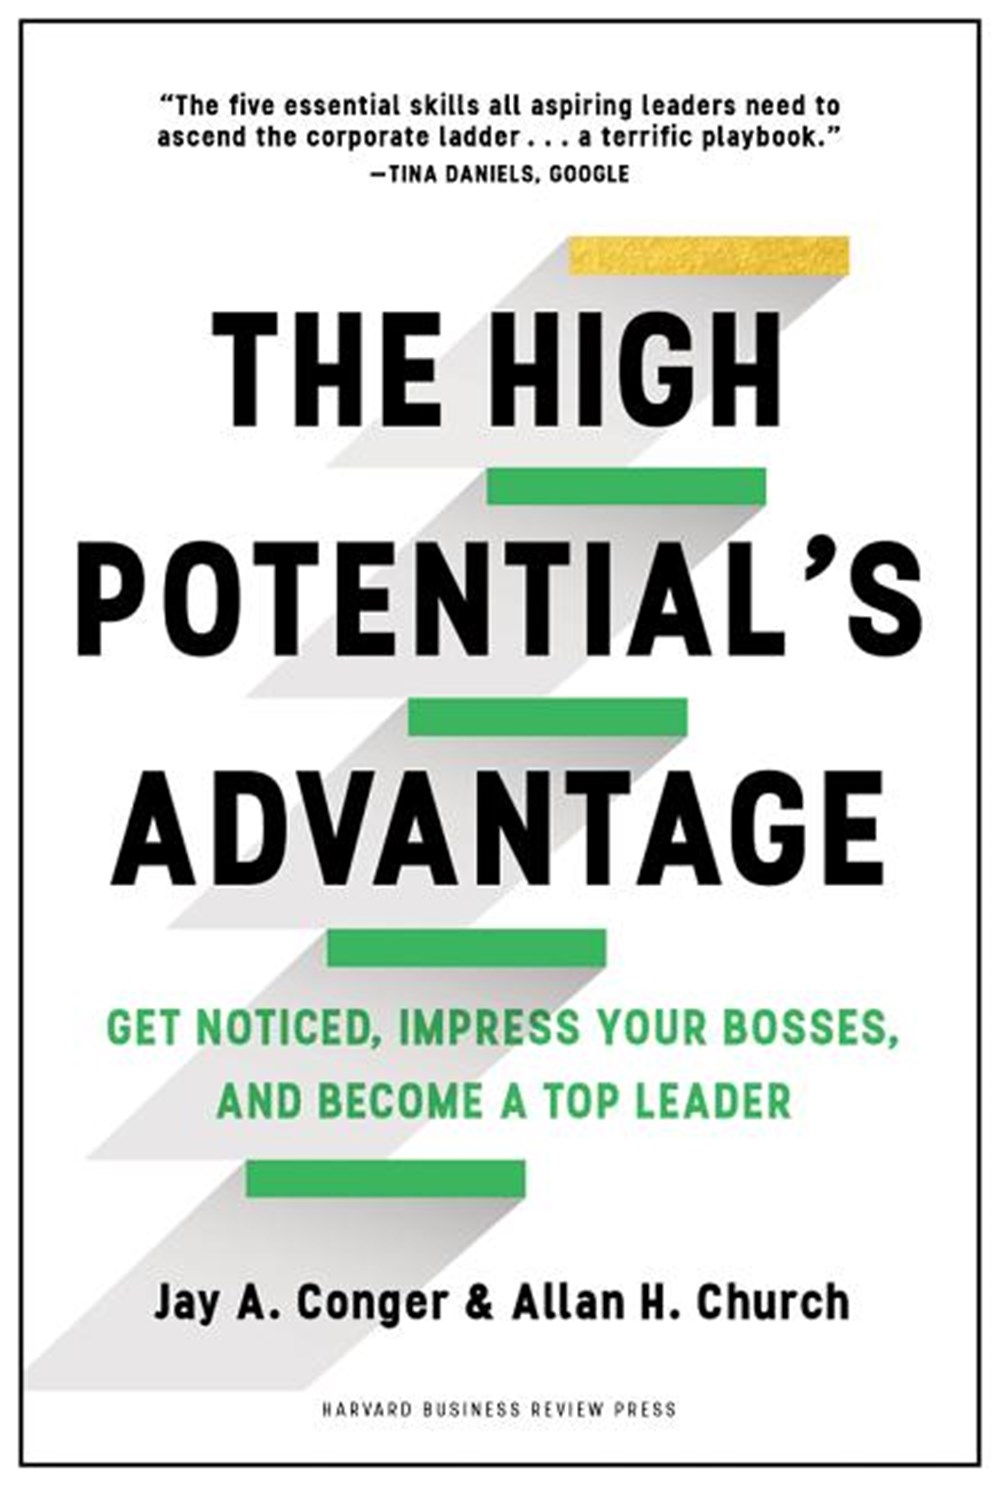 High Potential's Advantage: Get Noticed, Impress Your Bosses, and Become a Top Leader